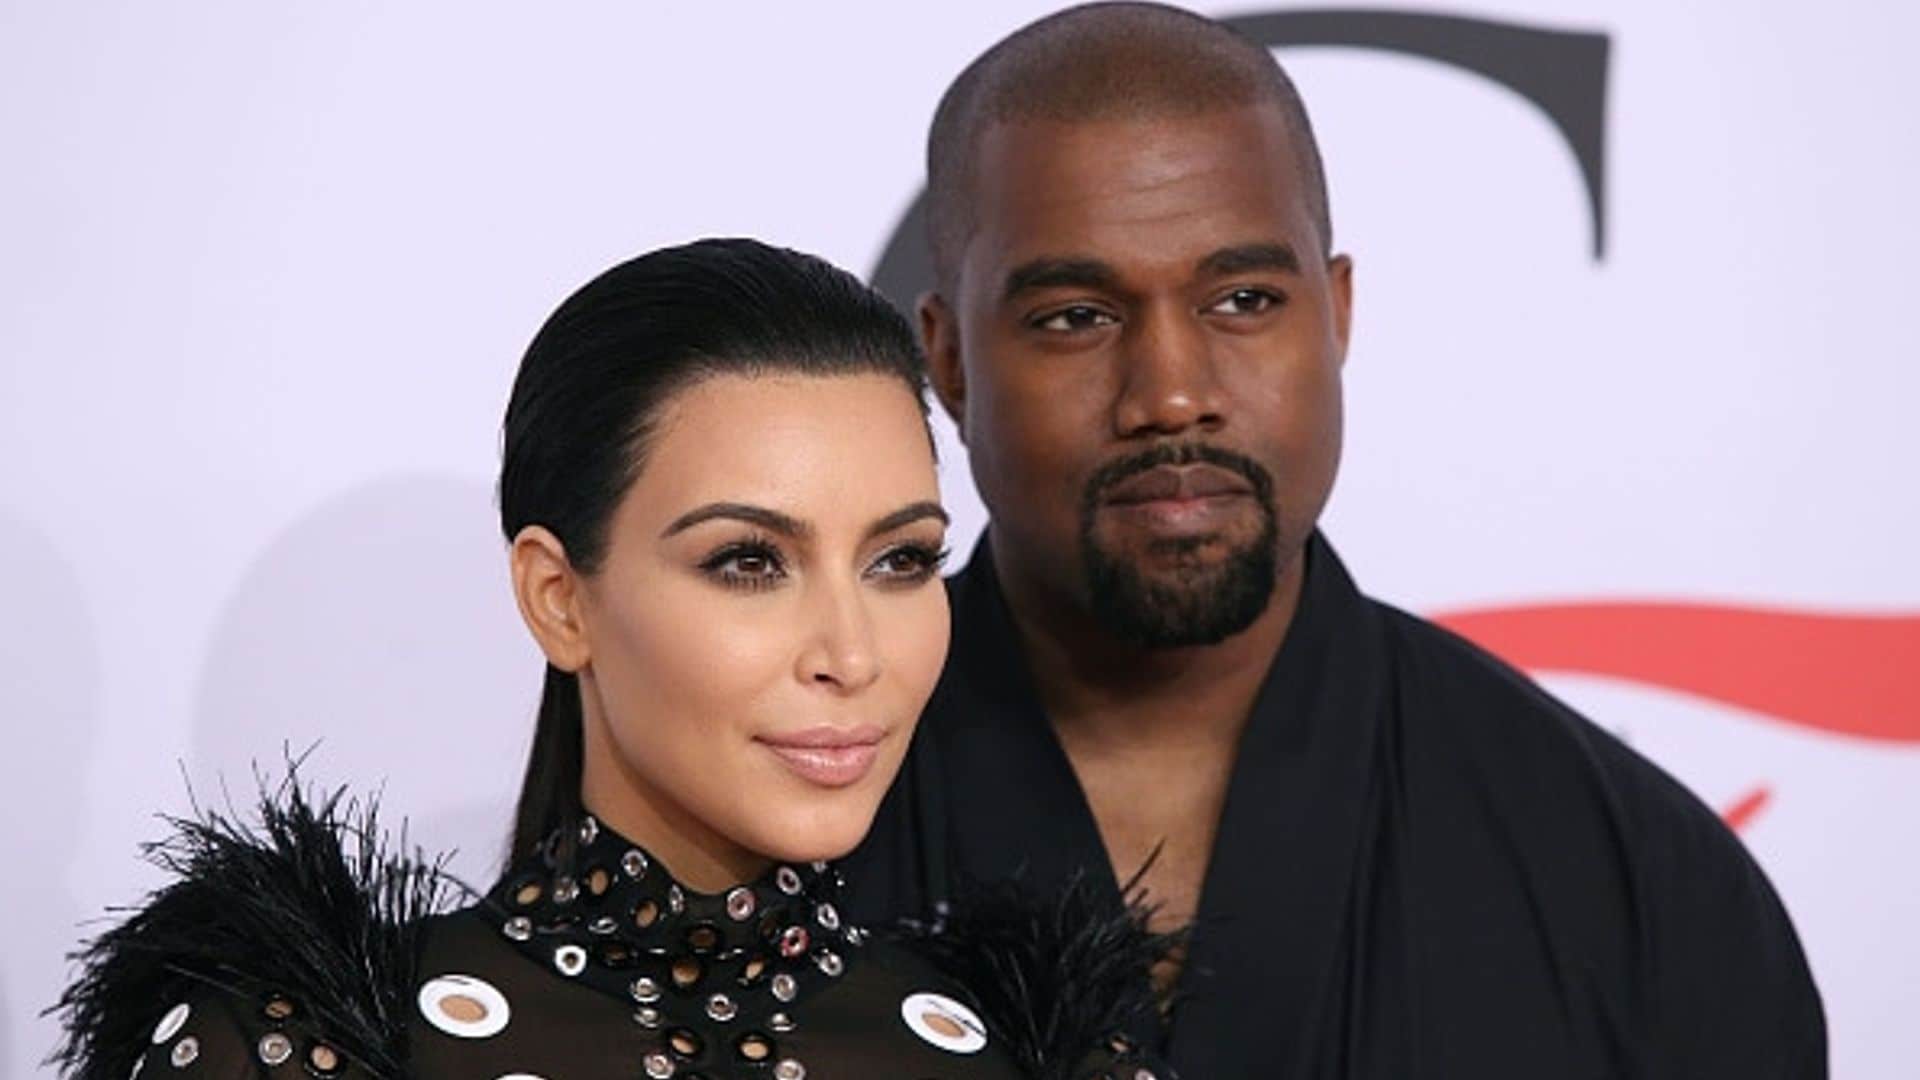 Kim Kardashian and Kanye West welcome son and 'are doing well'